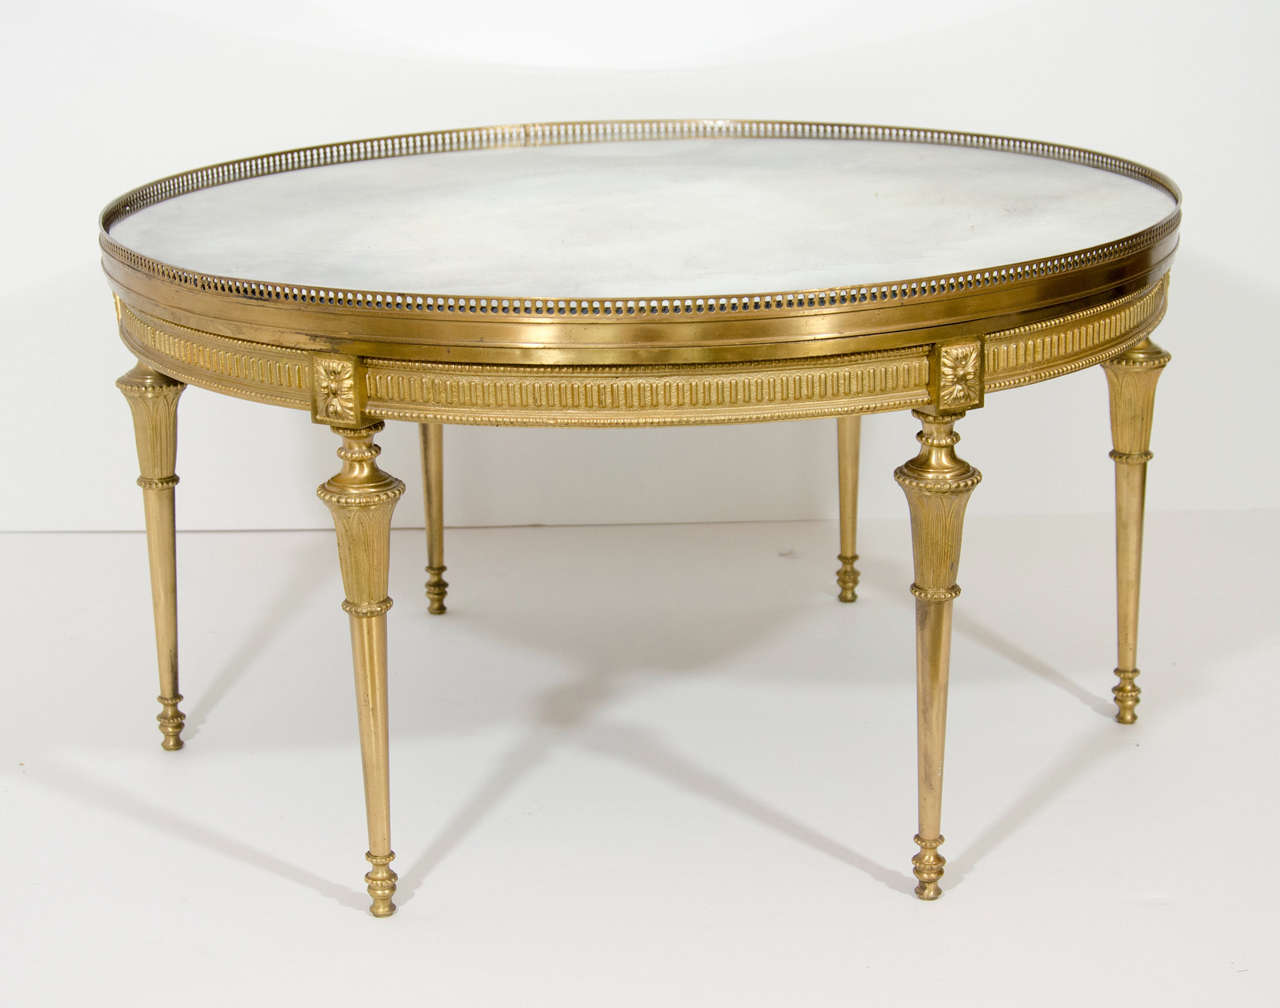 A circular antique French Louis XVI style gilt bronze mirror top coffee table of great quality embellished with reticulated gilt bronze gallery and gilt bronze legs.